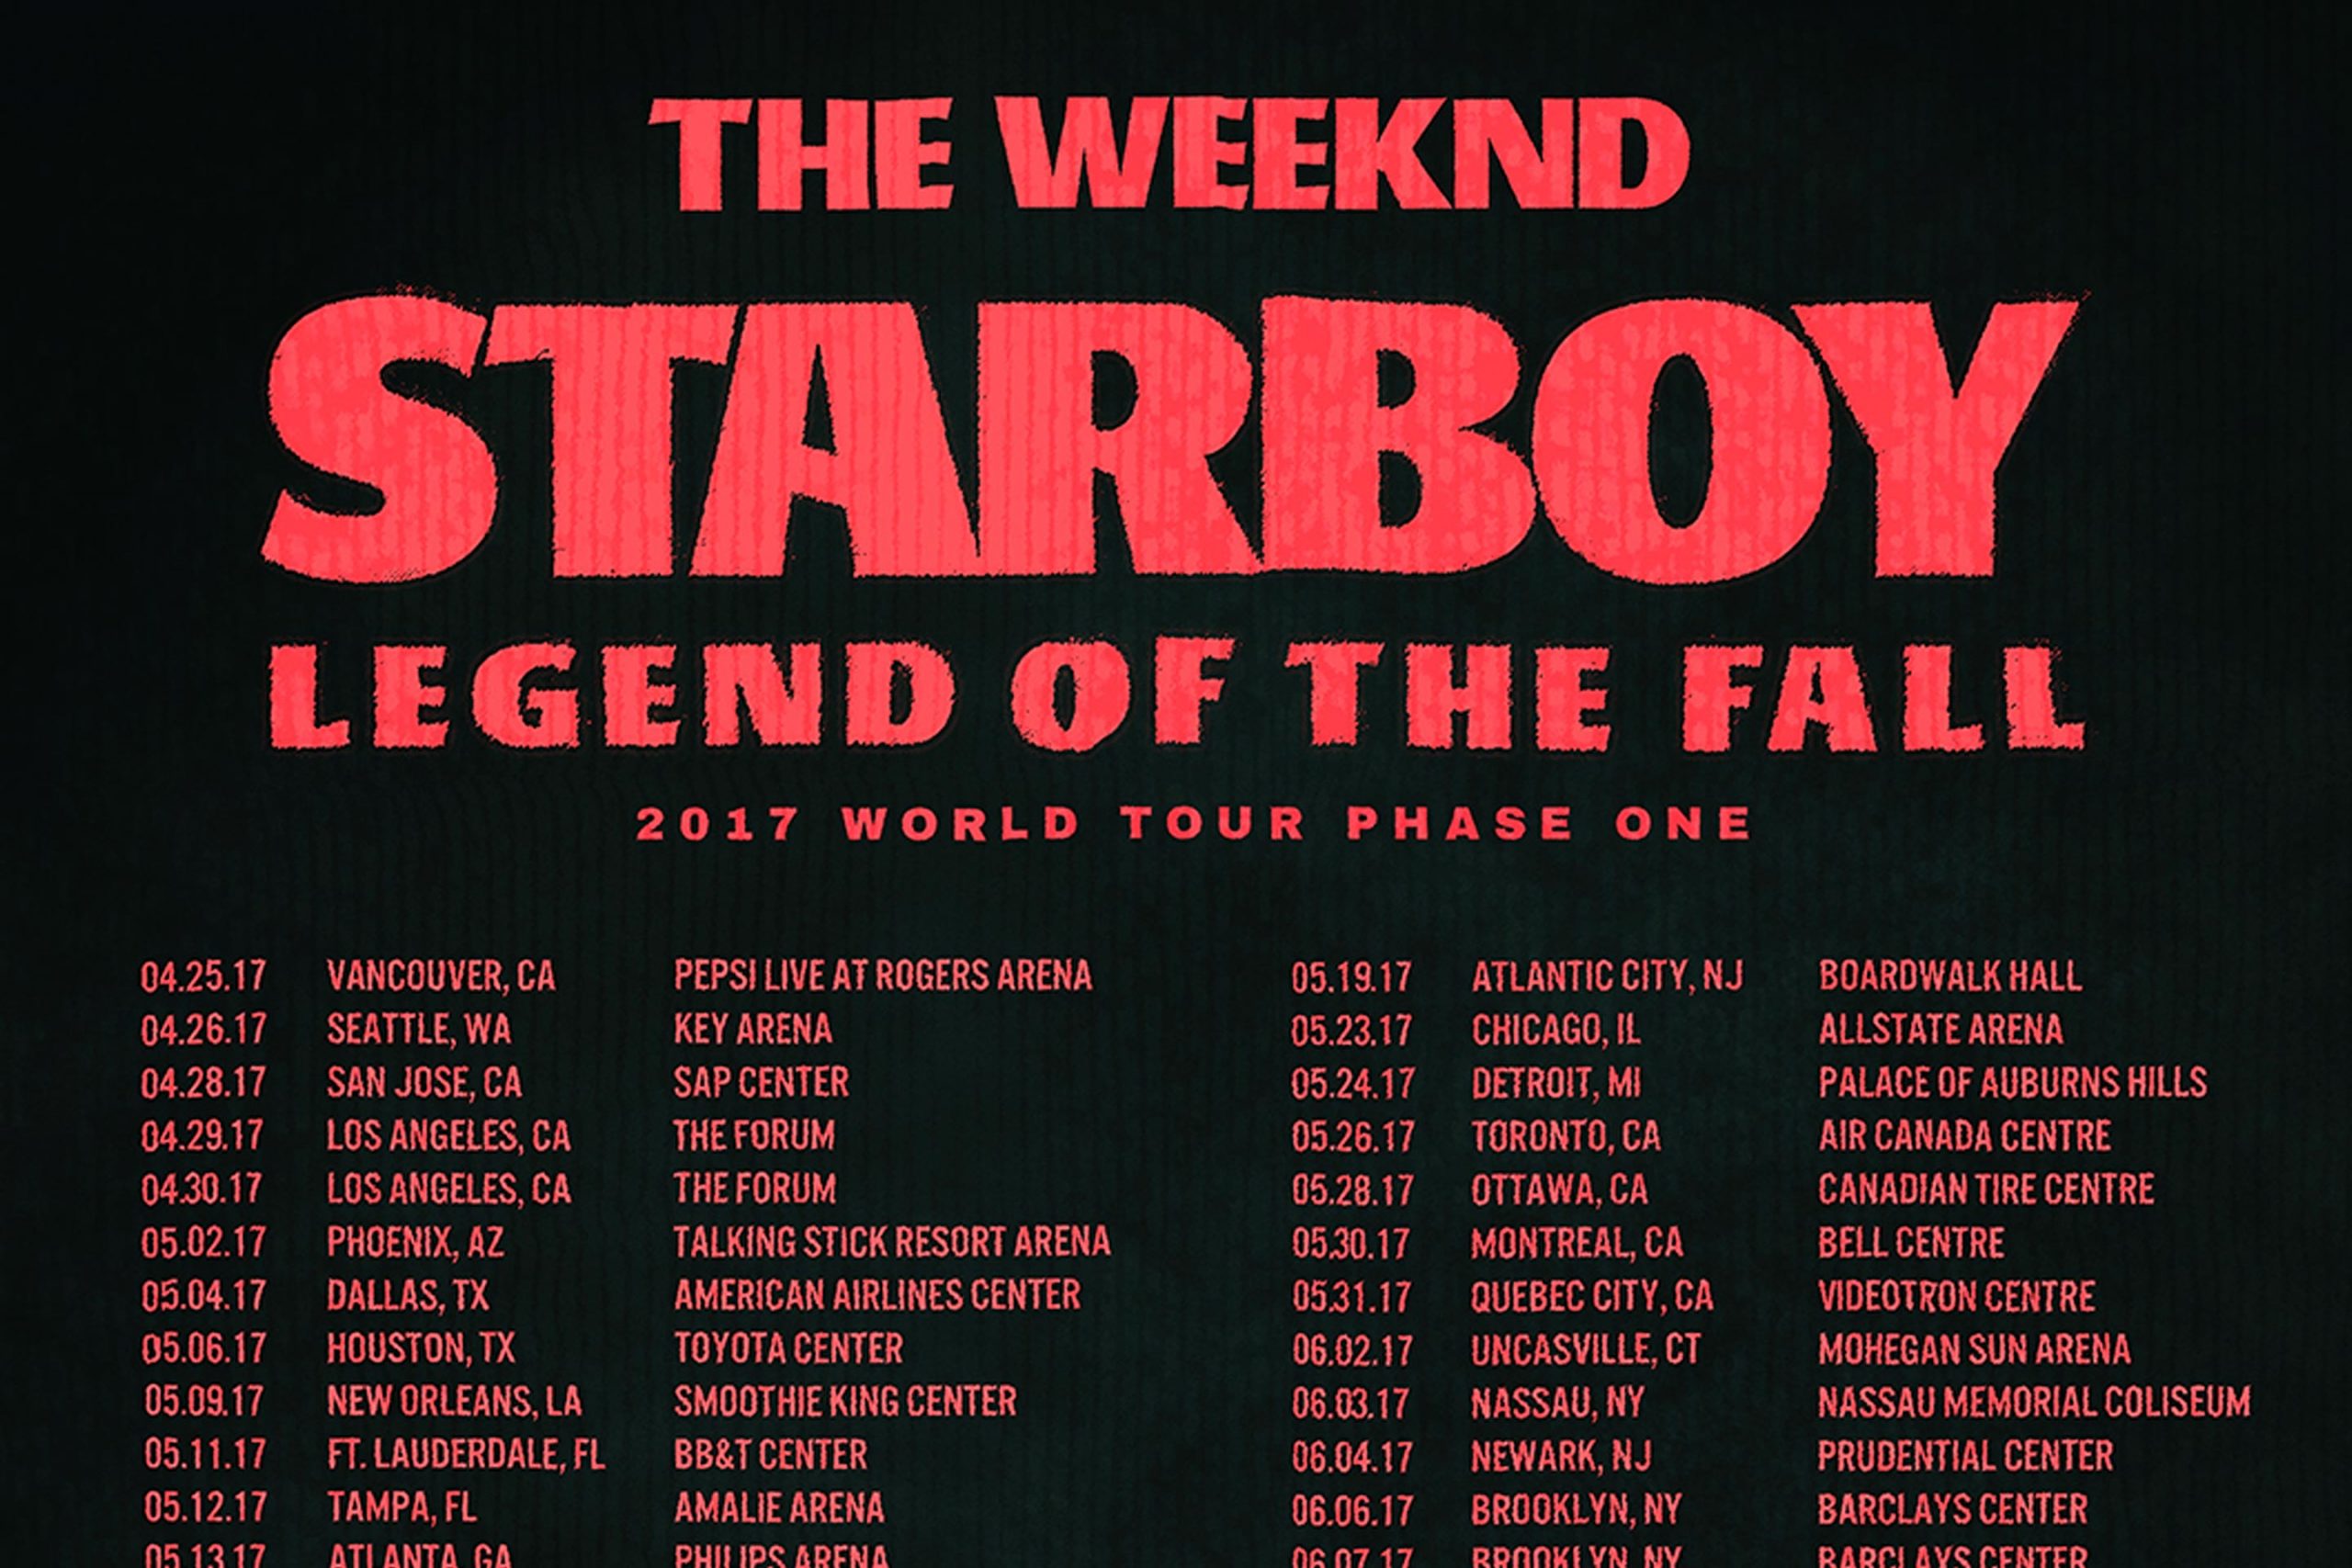 The weeknd starboy legend of the fall 2017 world tour phase one